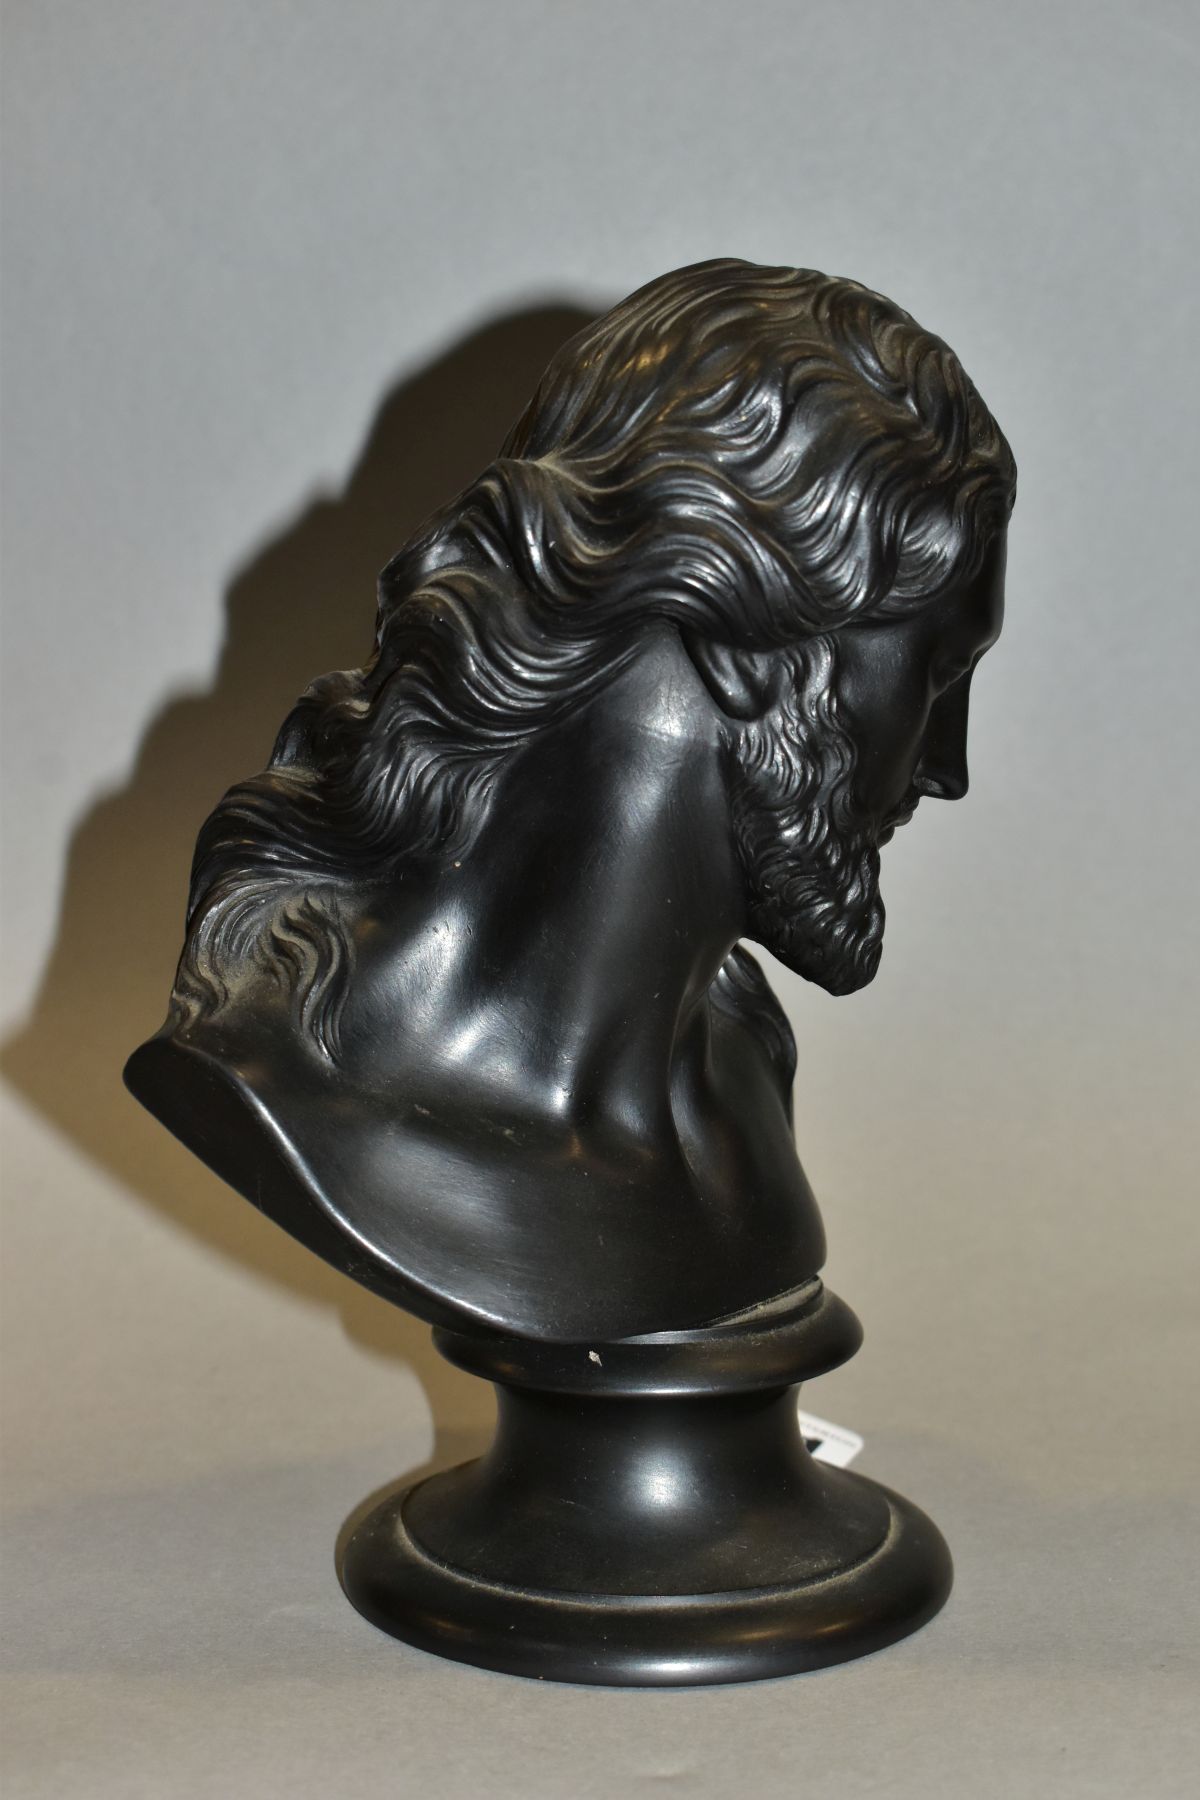 A LATE 19TH CENTURY WEDGWOOD BLACK BASALT BUST OF JESUS CHRIST, impressed marks to back of bust - Image 2 of 6